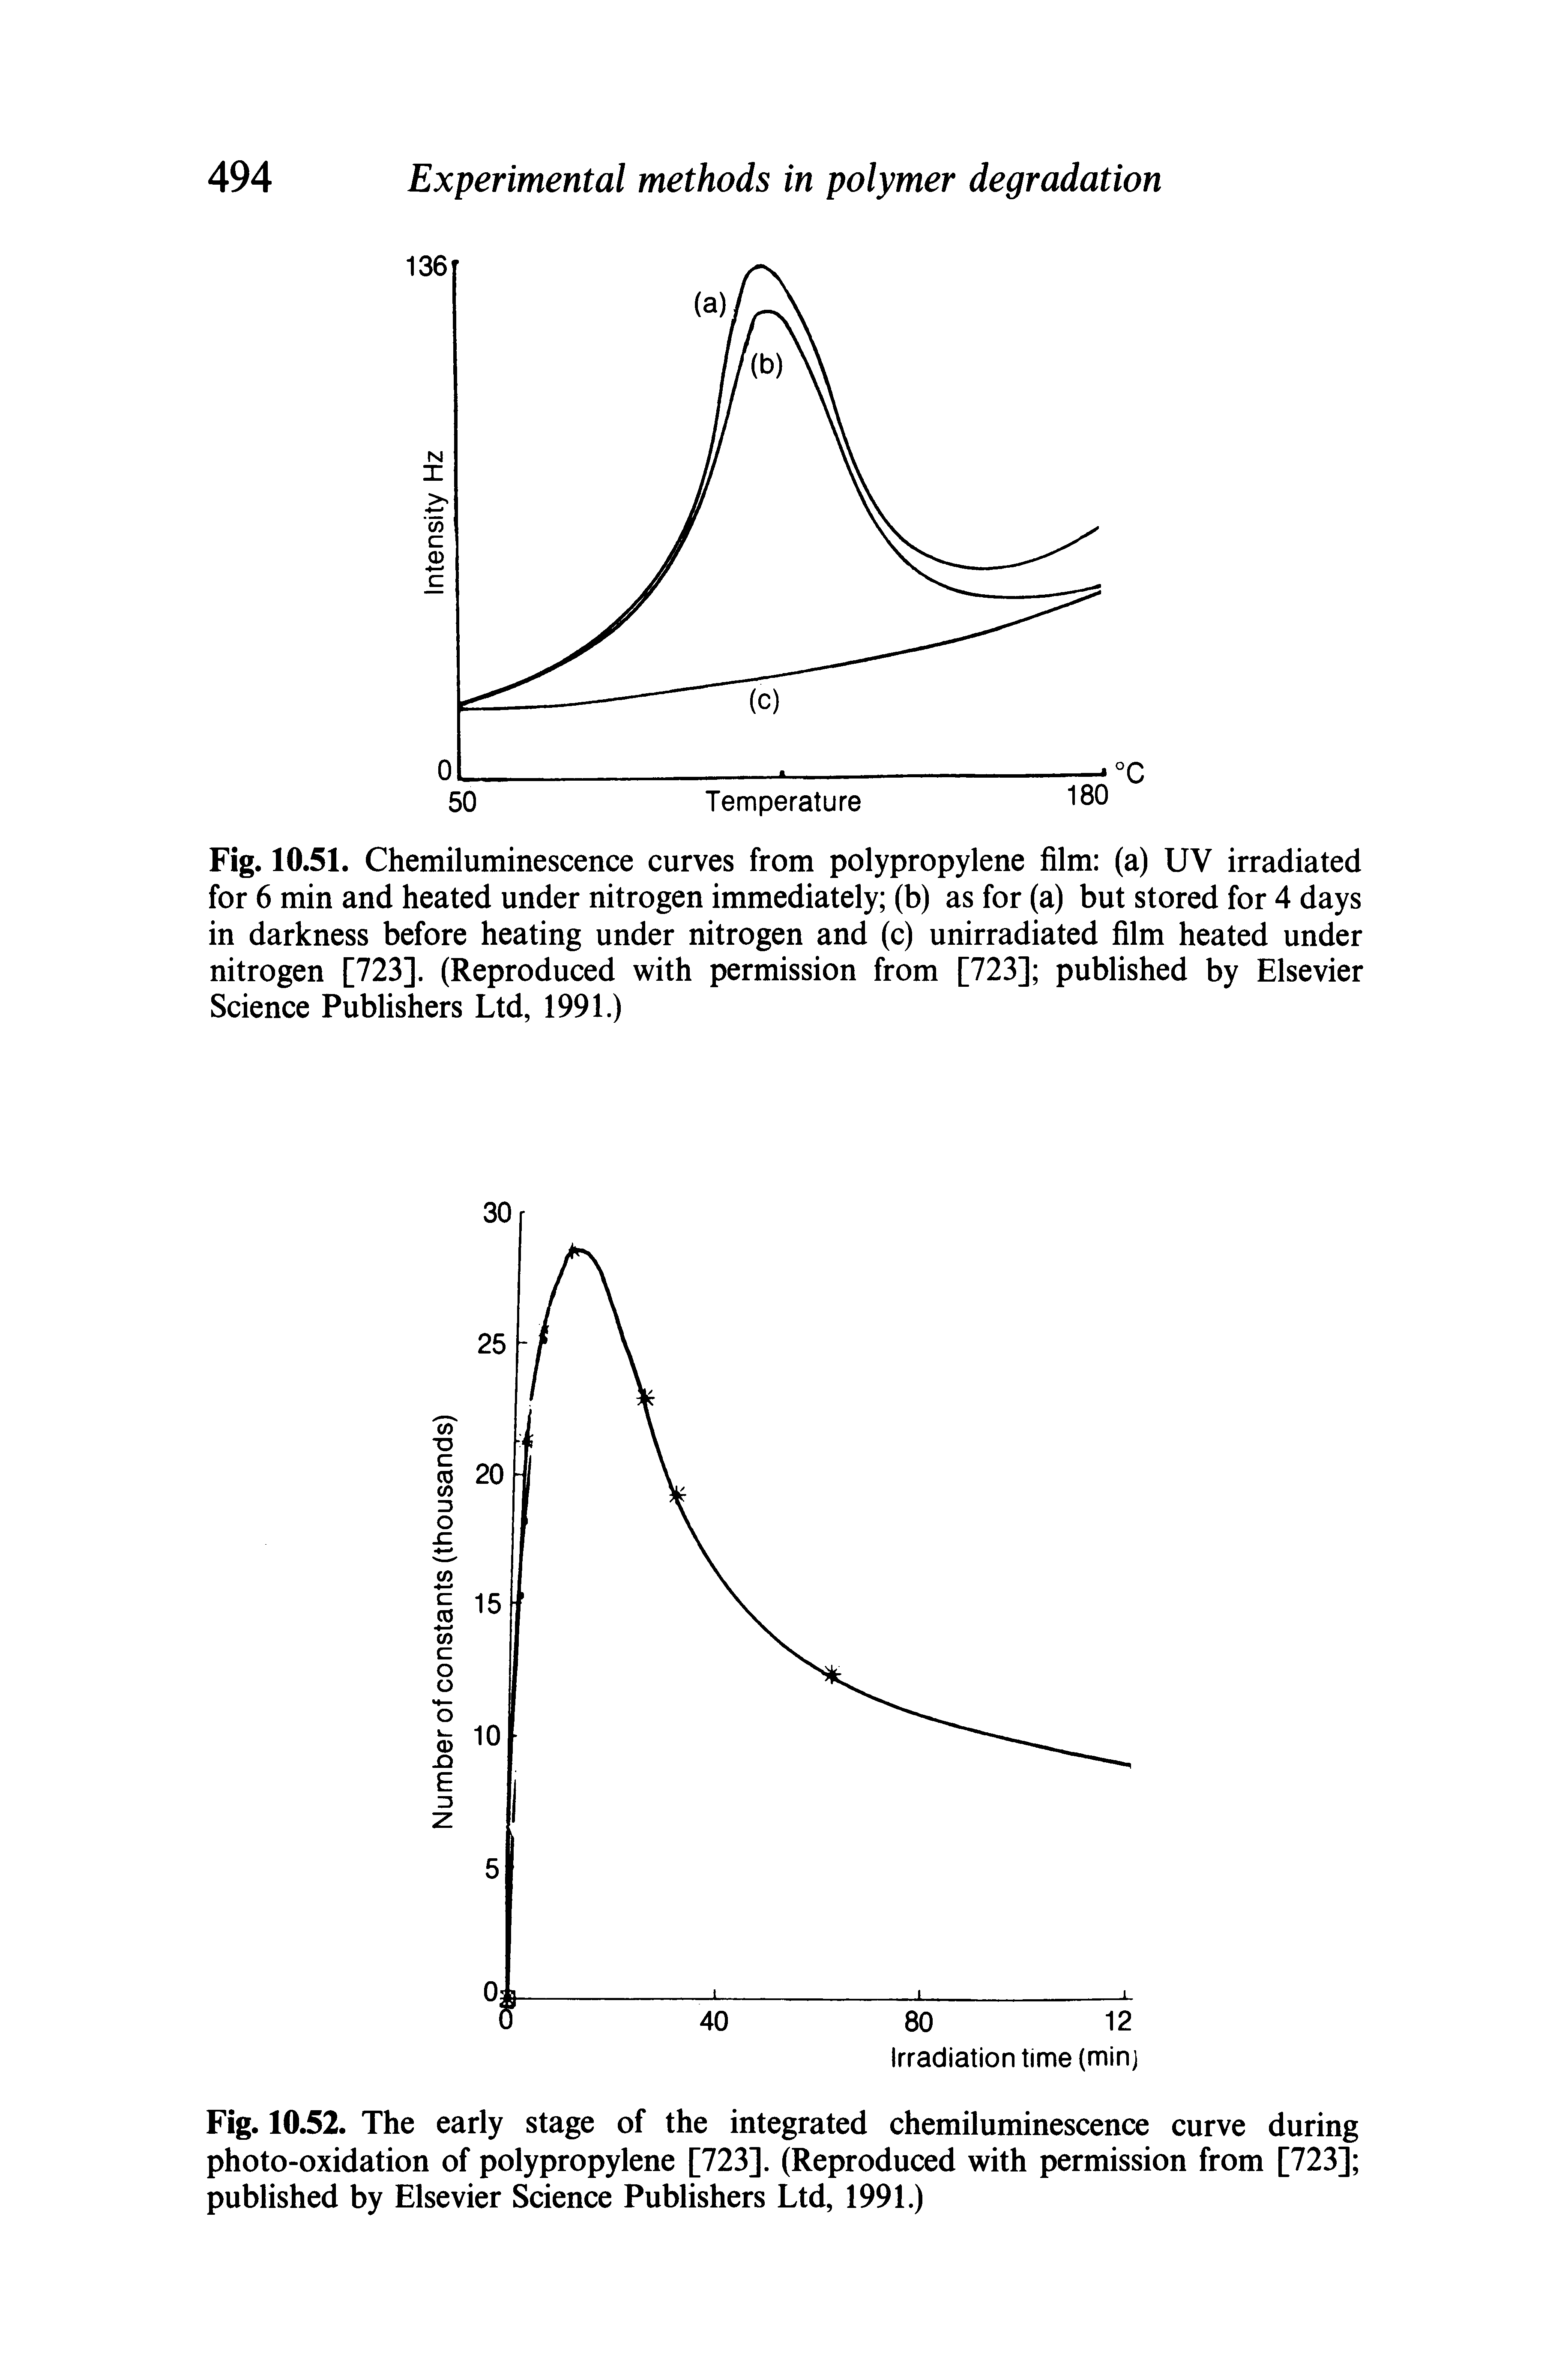 Fig. 10.51, Chemiluminescence curves from polypropylene film (a) UV irradiated for 6 min and heated under nitrogen immediately (b) as for (a) but stored for 4 days in darkness before heating under nitrogen and (c) unirradiated film heated under nitrogen [723]. (Reproduced with permission from [723] published by Elsevier Science Publishers Ltd, 1991.)...